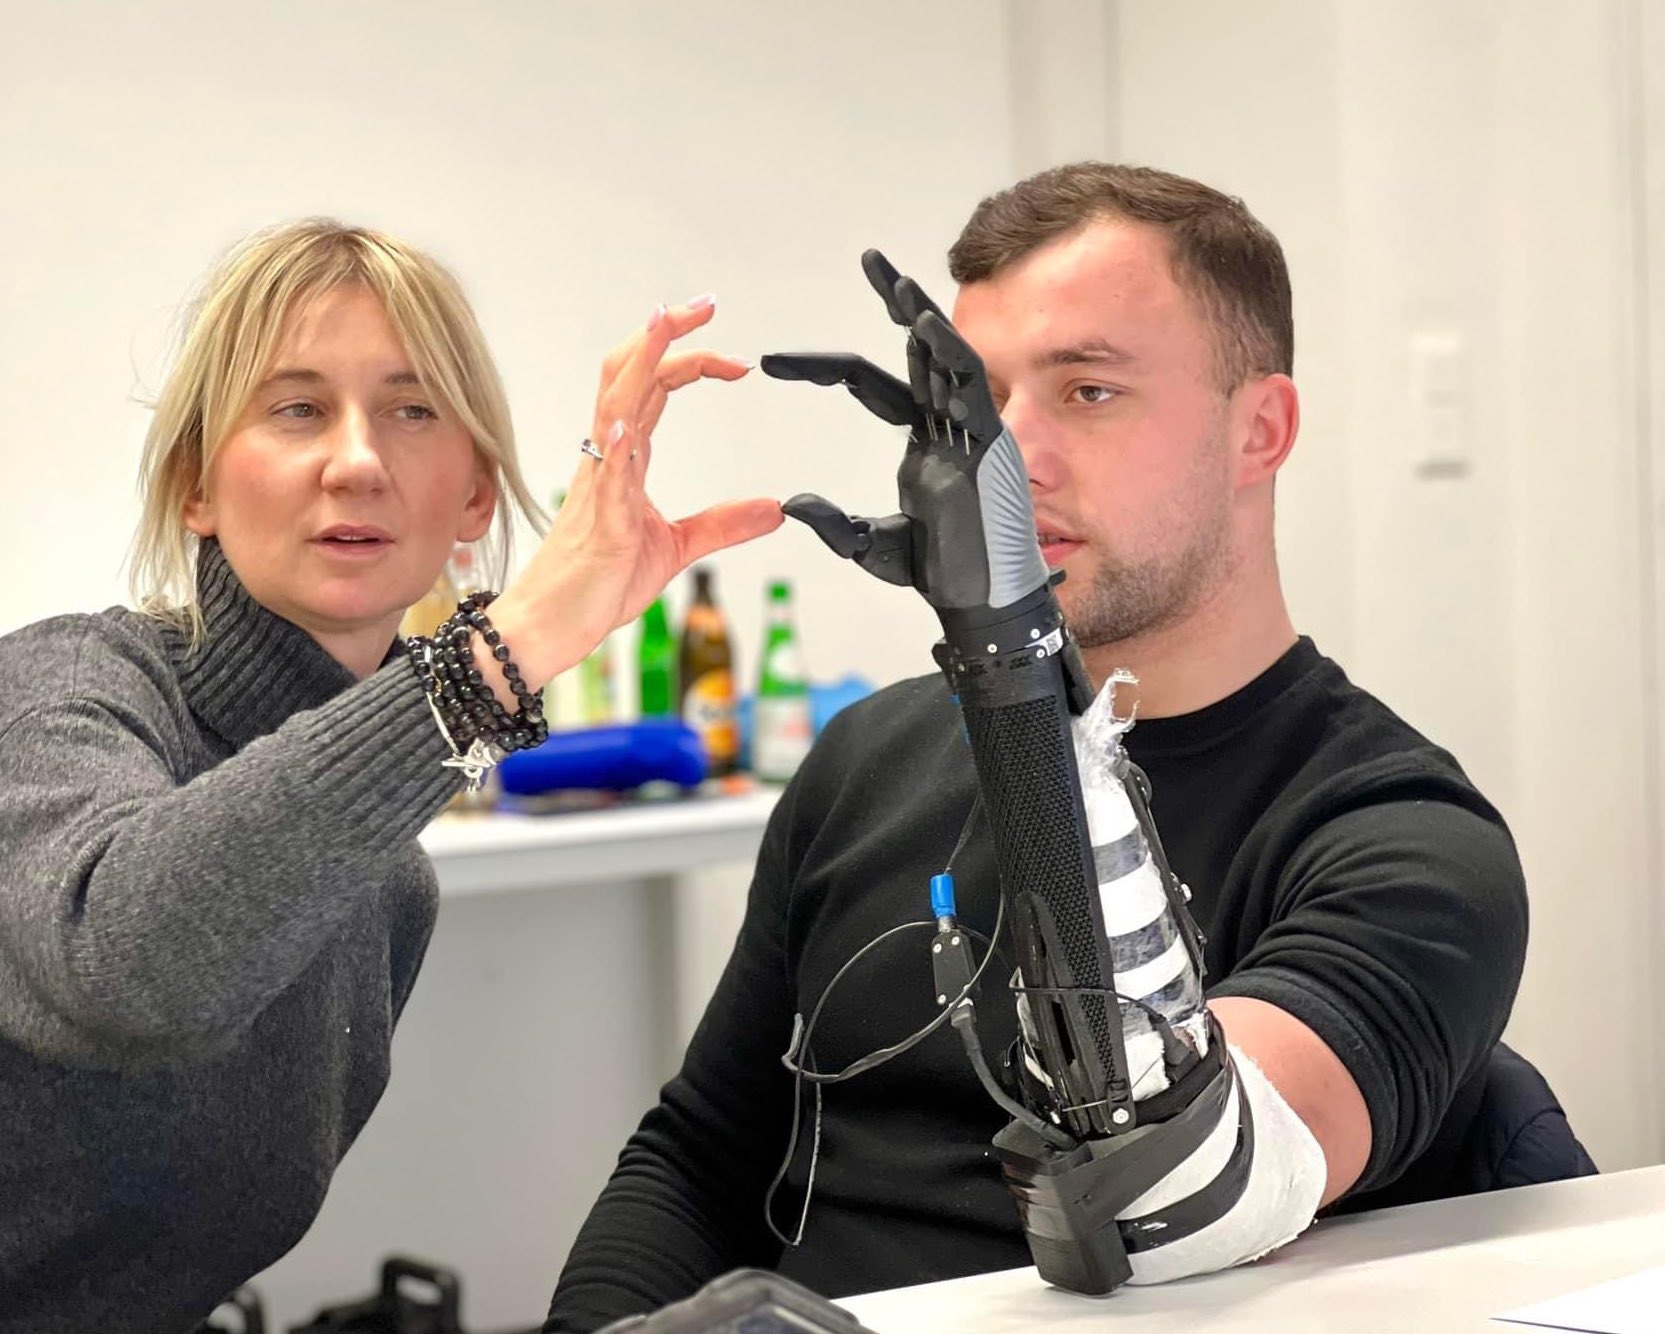 Kate's 3D printed bionic arm improved her health - and her confidence